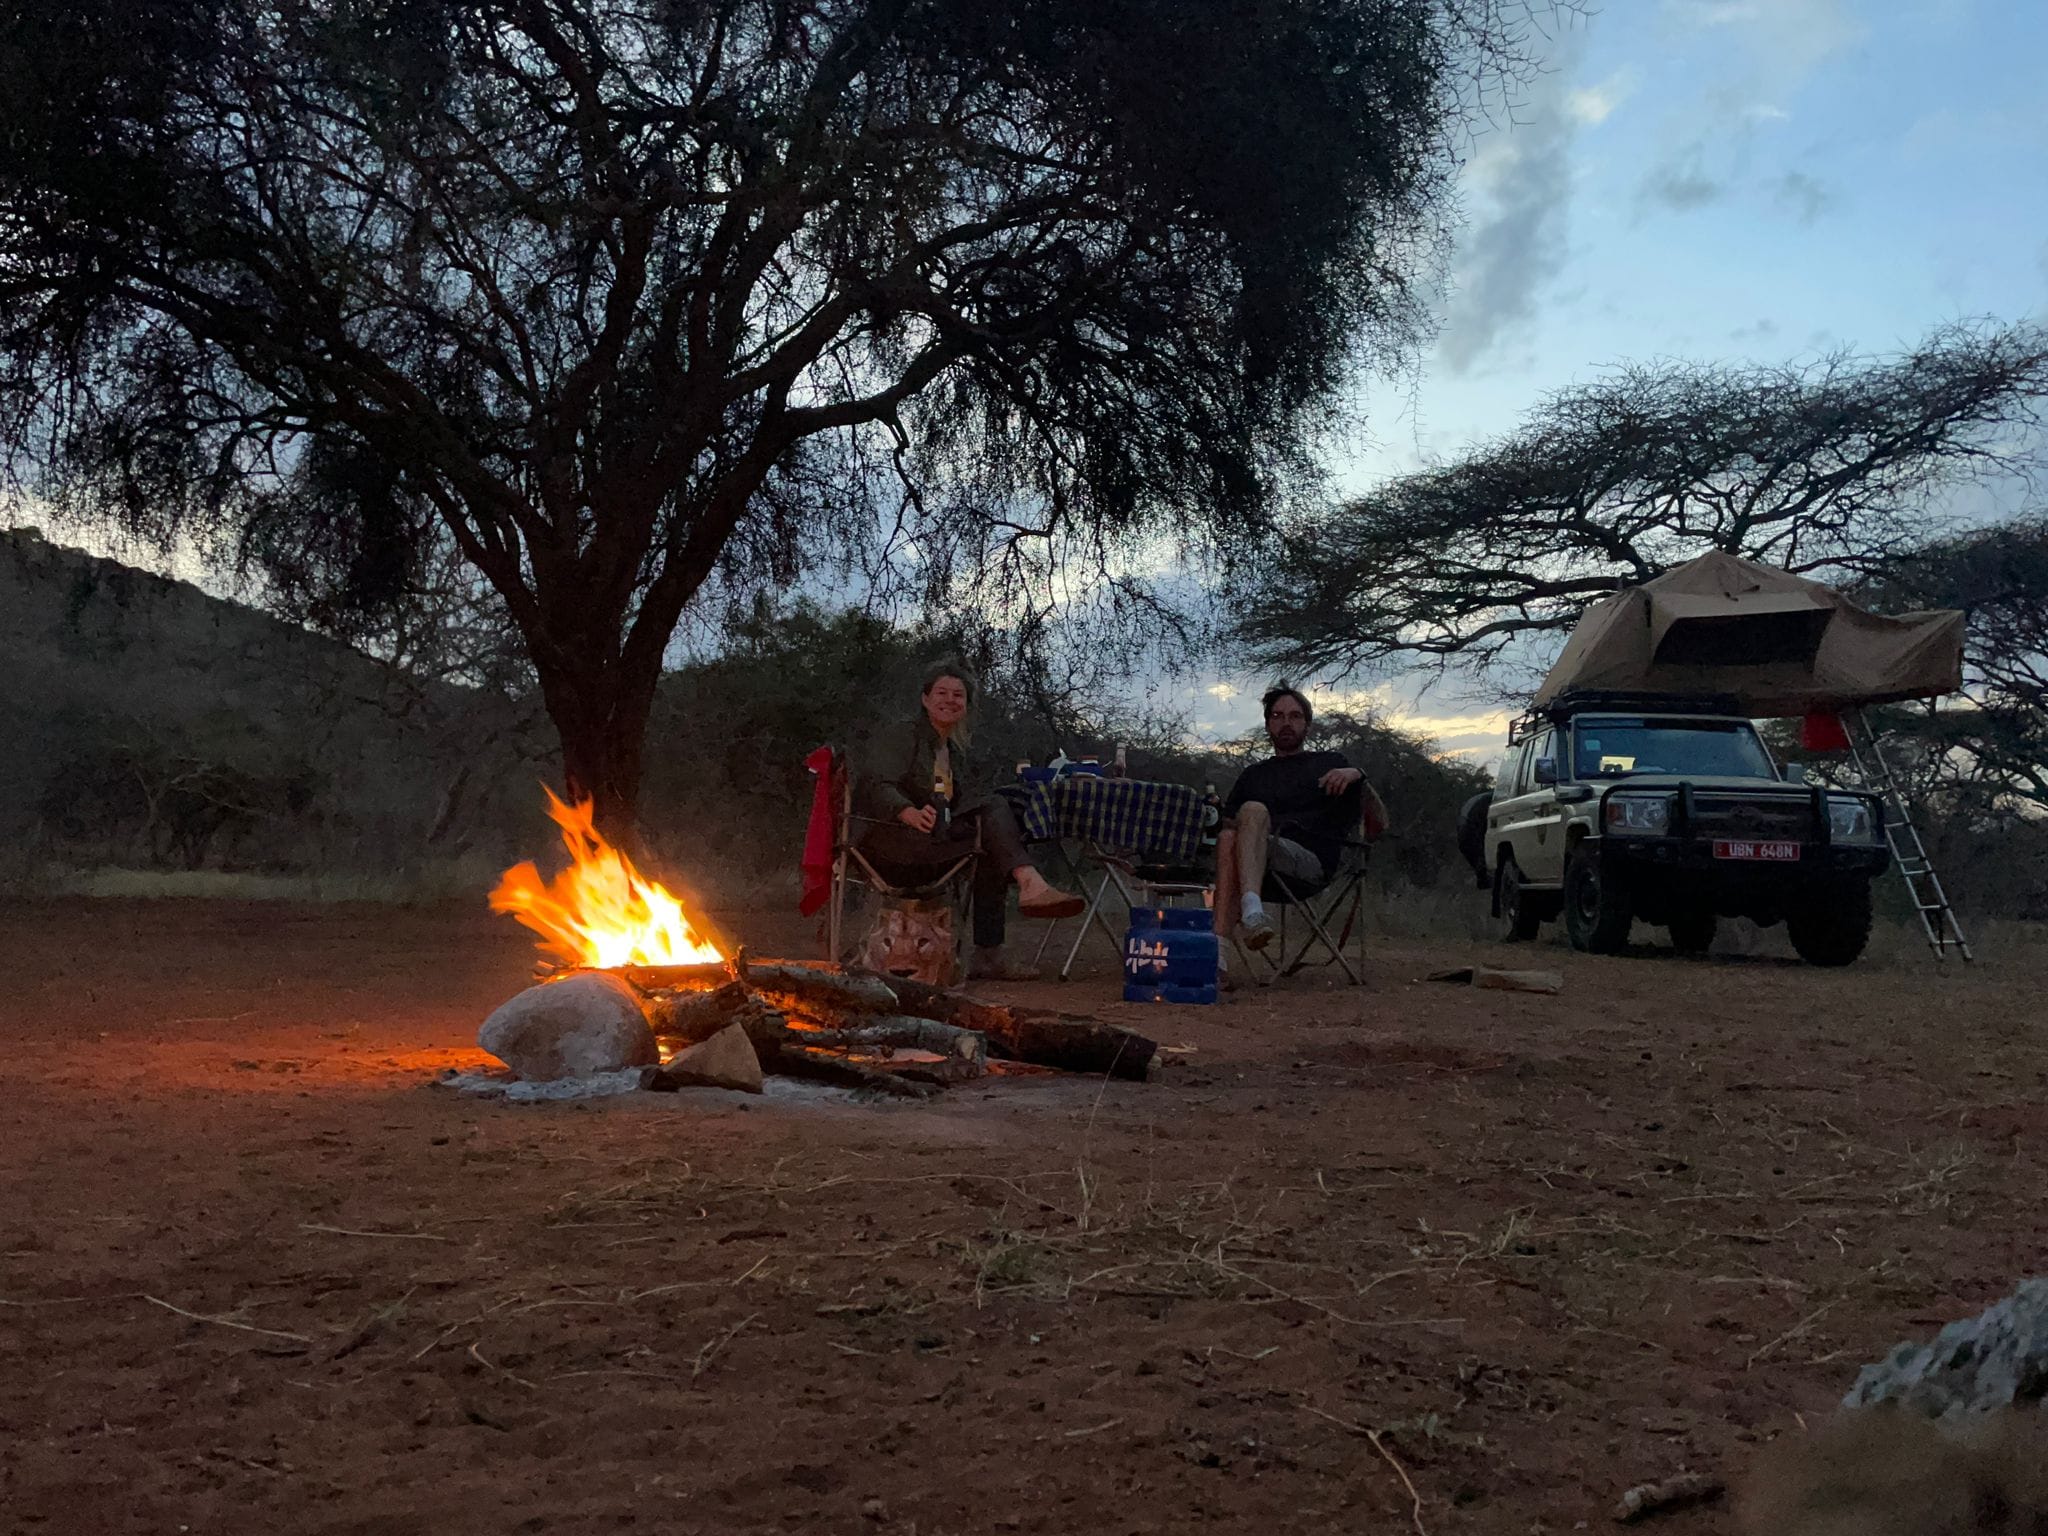 tourists-in-a-campsite-in-kenya-with-a-roof-tent-by-laba-africa-expeditions